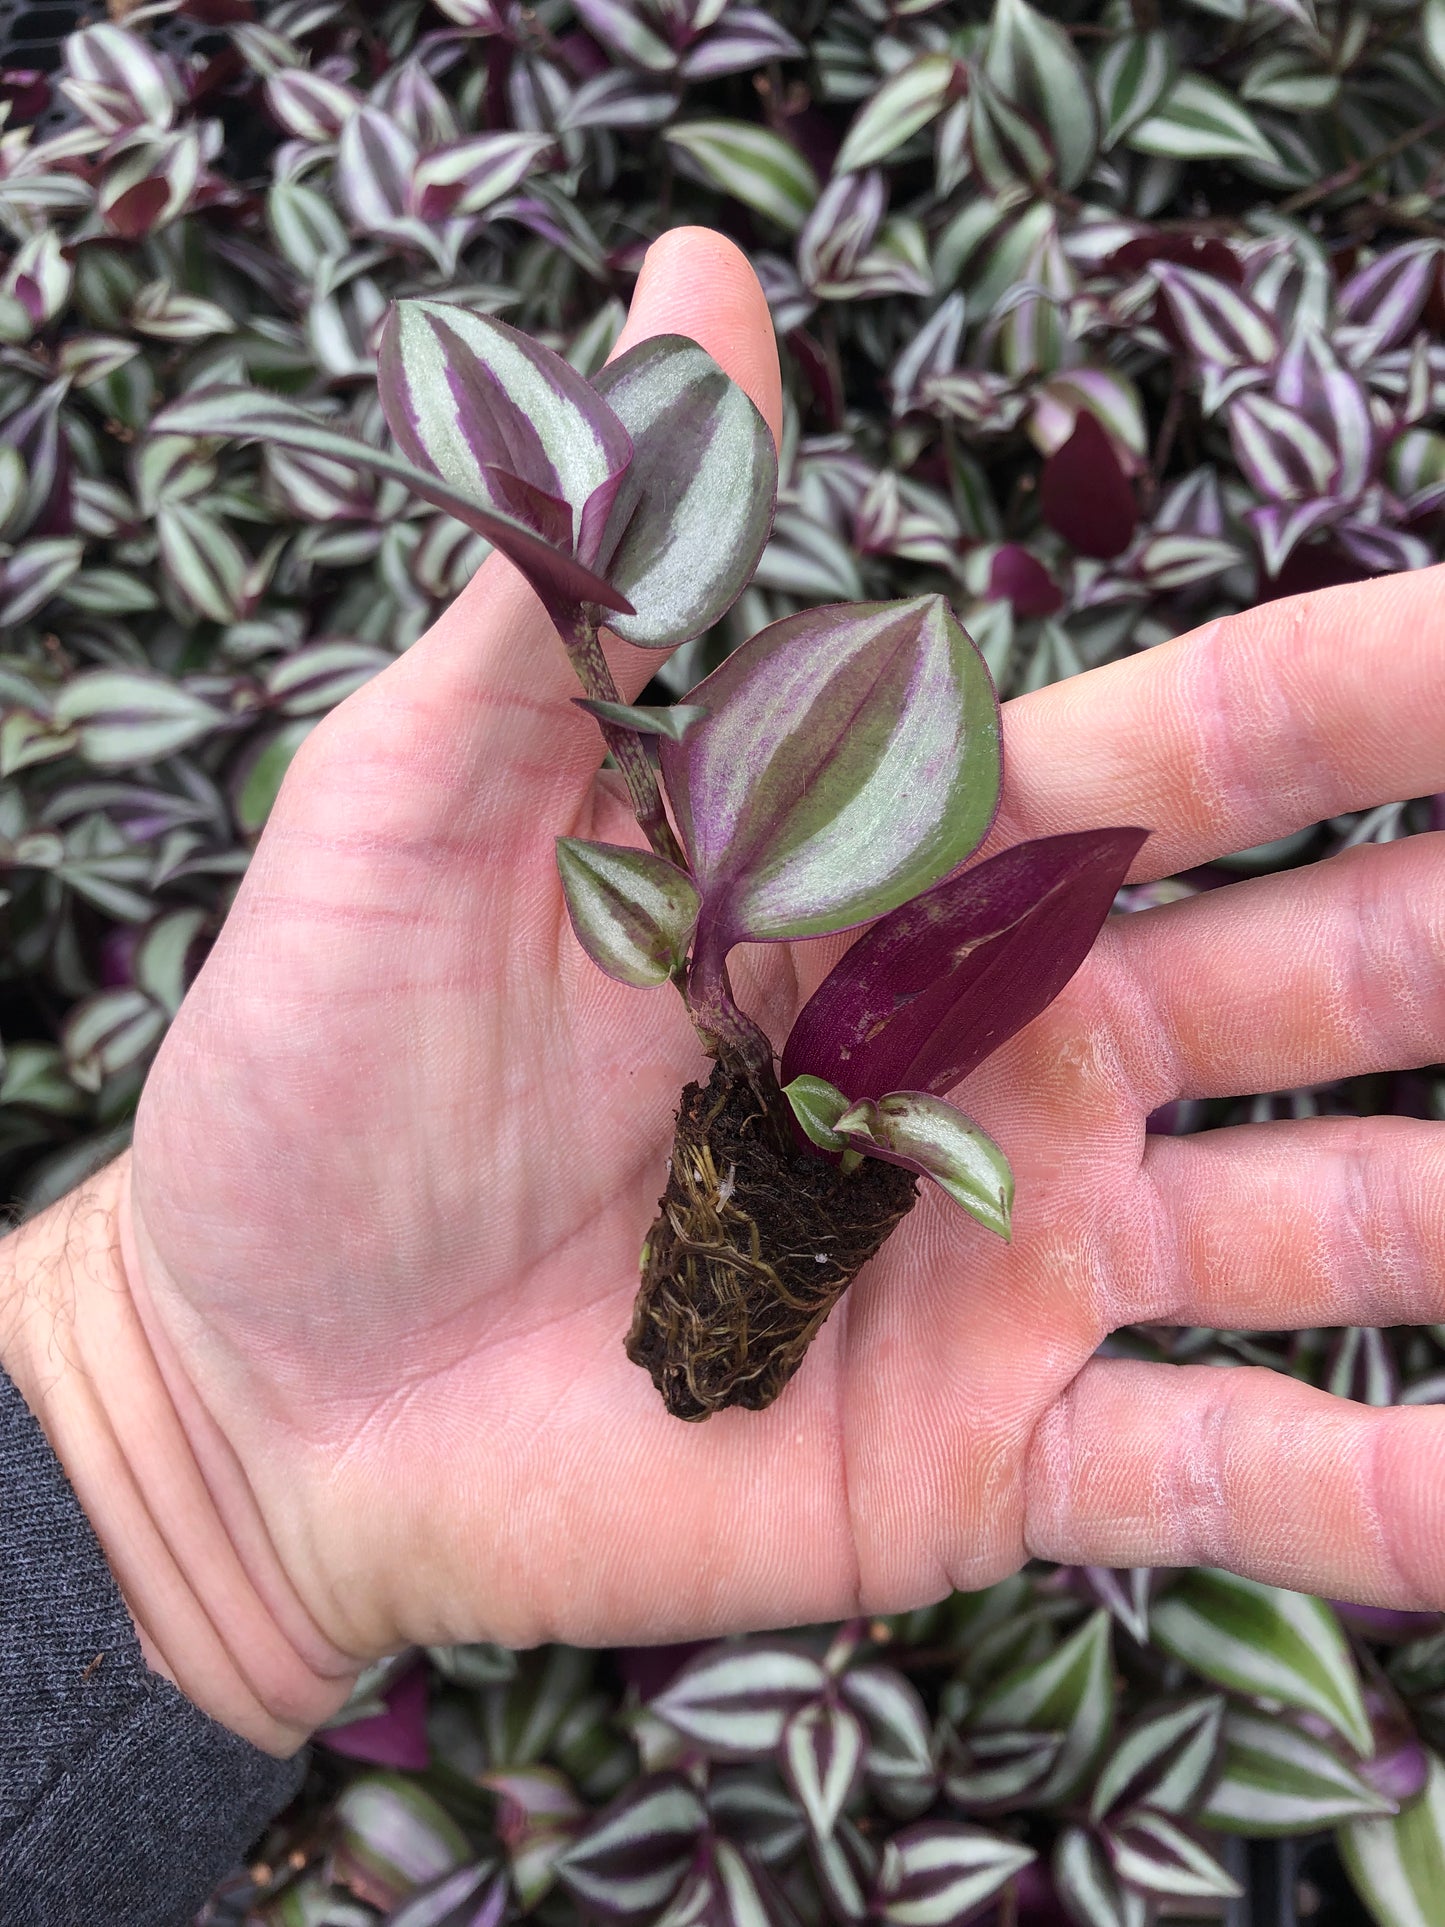 Tradescantia Zebrina rooted cuttings ~ 10 starter plants